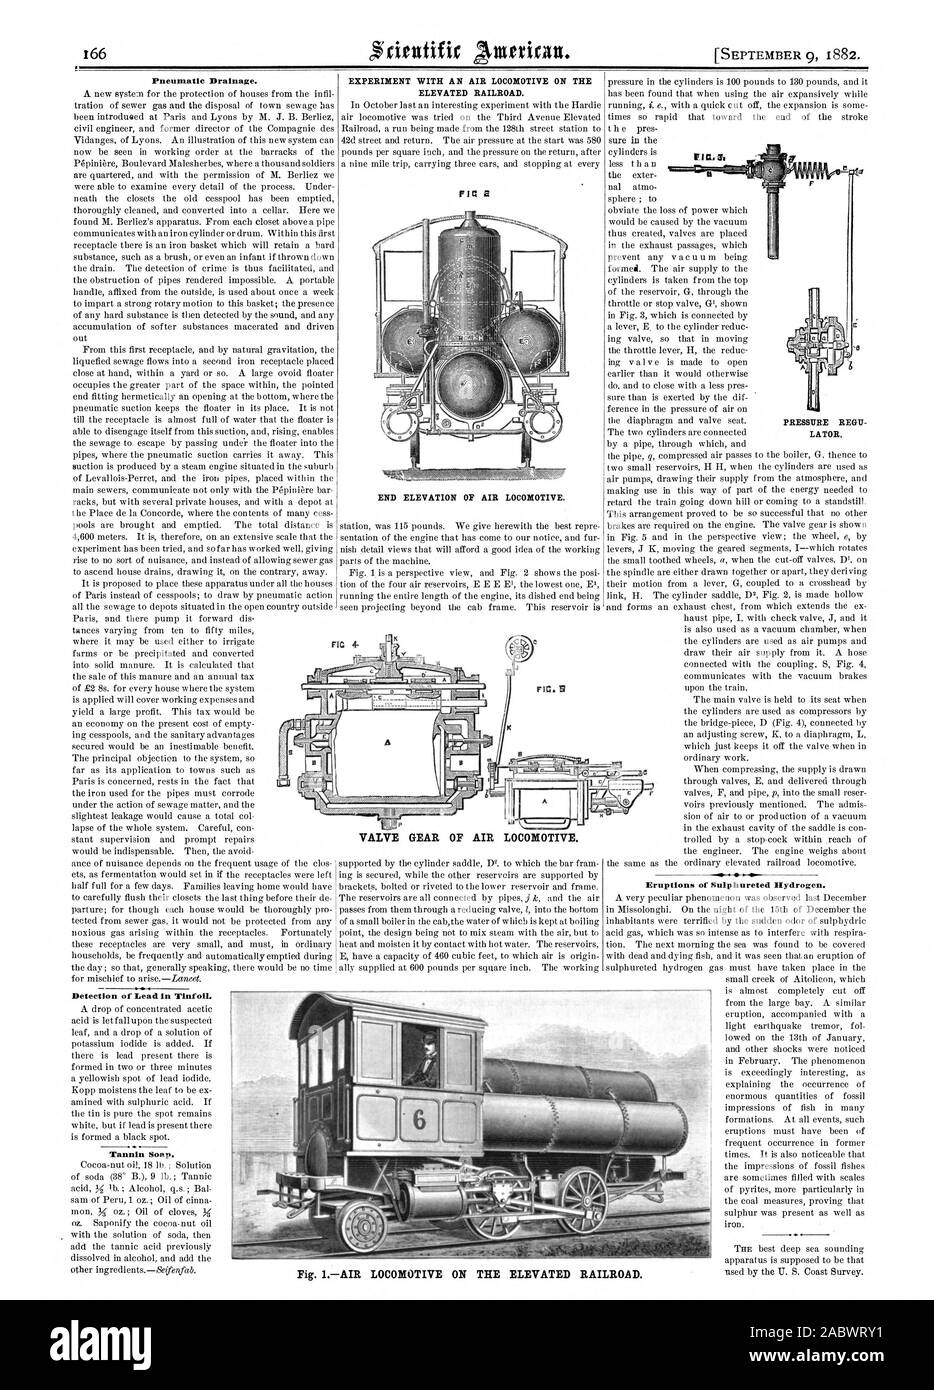 Pneumatic Drainage. EXPERIMENT WITH AN AIR LOCOMOTIVE ON THE ELEVATED RAILROAD. Eruptions of Sulphureted Hydrogen. I a 2 END ELEVATION OF AIR LOCOMOTIVE. IF I M 3 PRESSURE REGU LATOR. VALVE GEAR OF AIR LOCOMOTIVE Detection of Lead in Tinfoil. Fig. 1AIR LOCOMOTIVE ON THE ELEVATED RAILROAD., scientific american, 82-09-09 Stock Photo